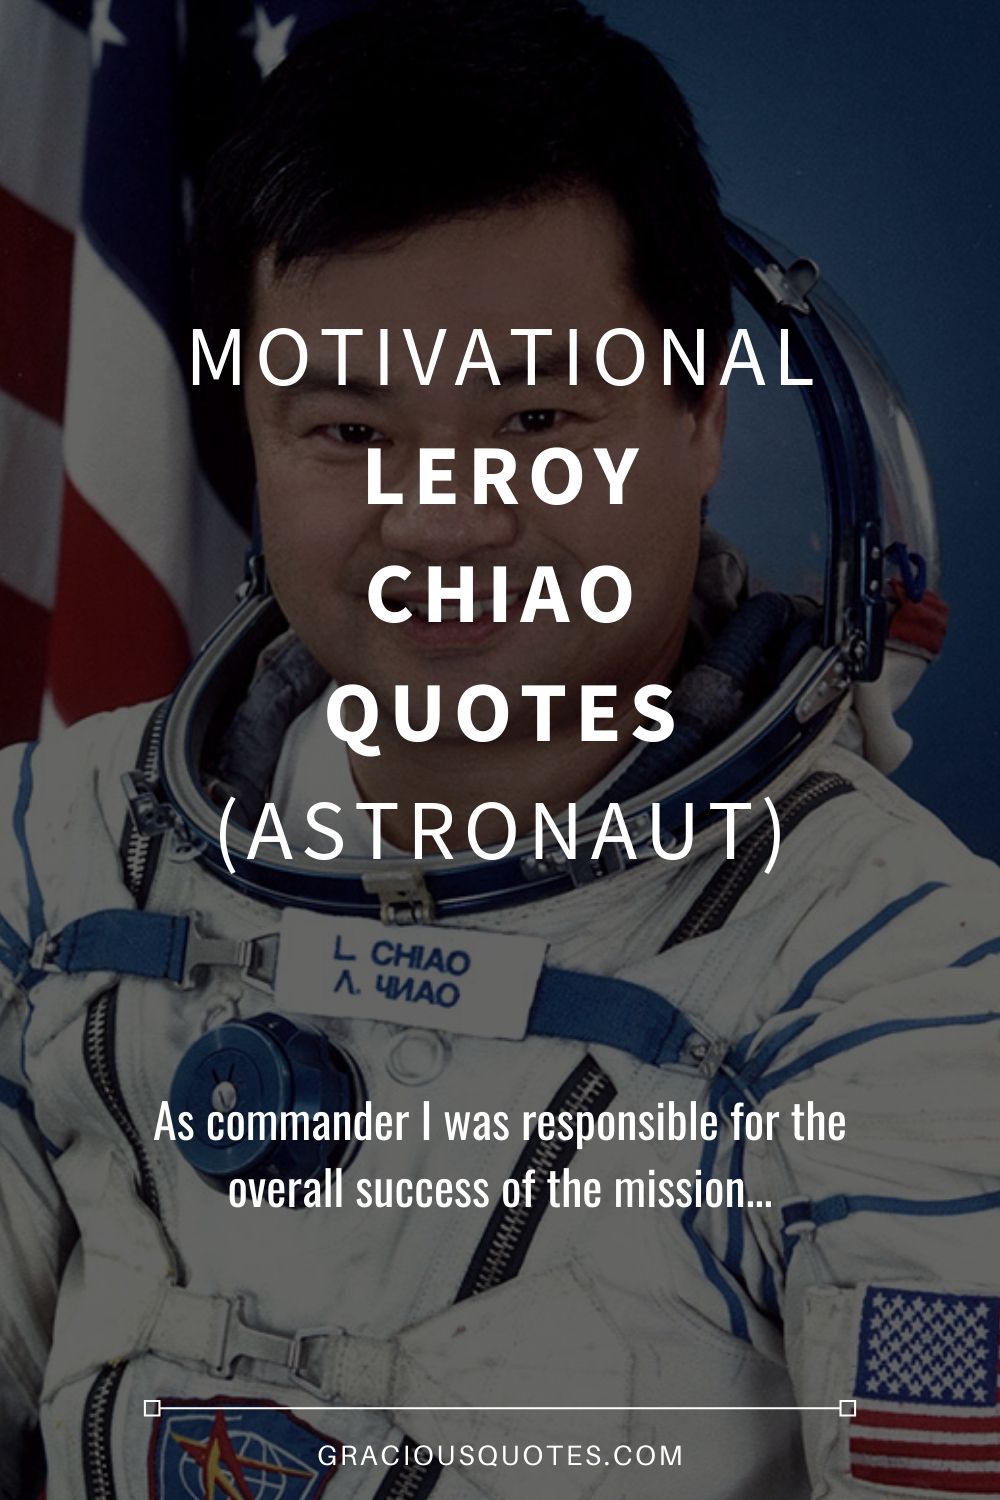 Motivational Leroy Chiao Quotes (ASTRONAUT) - Gracious Quotes